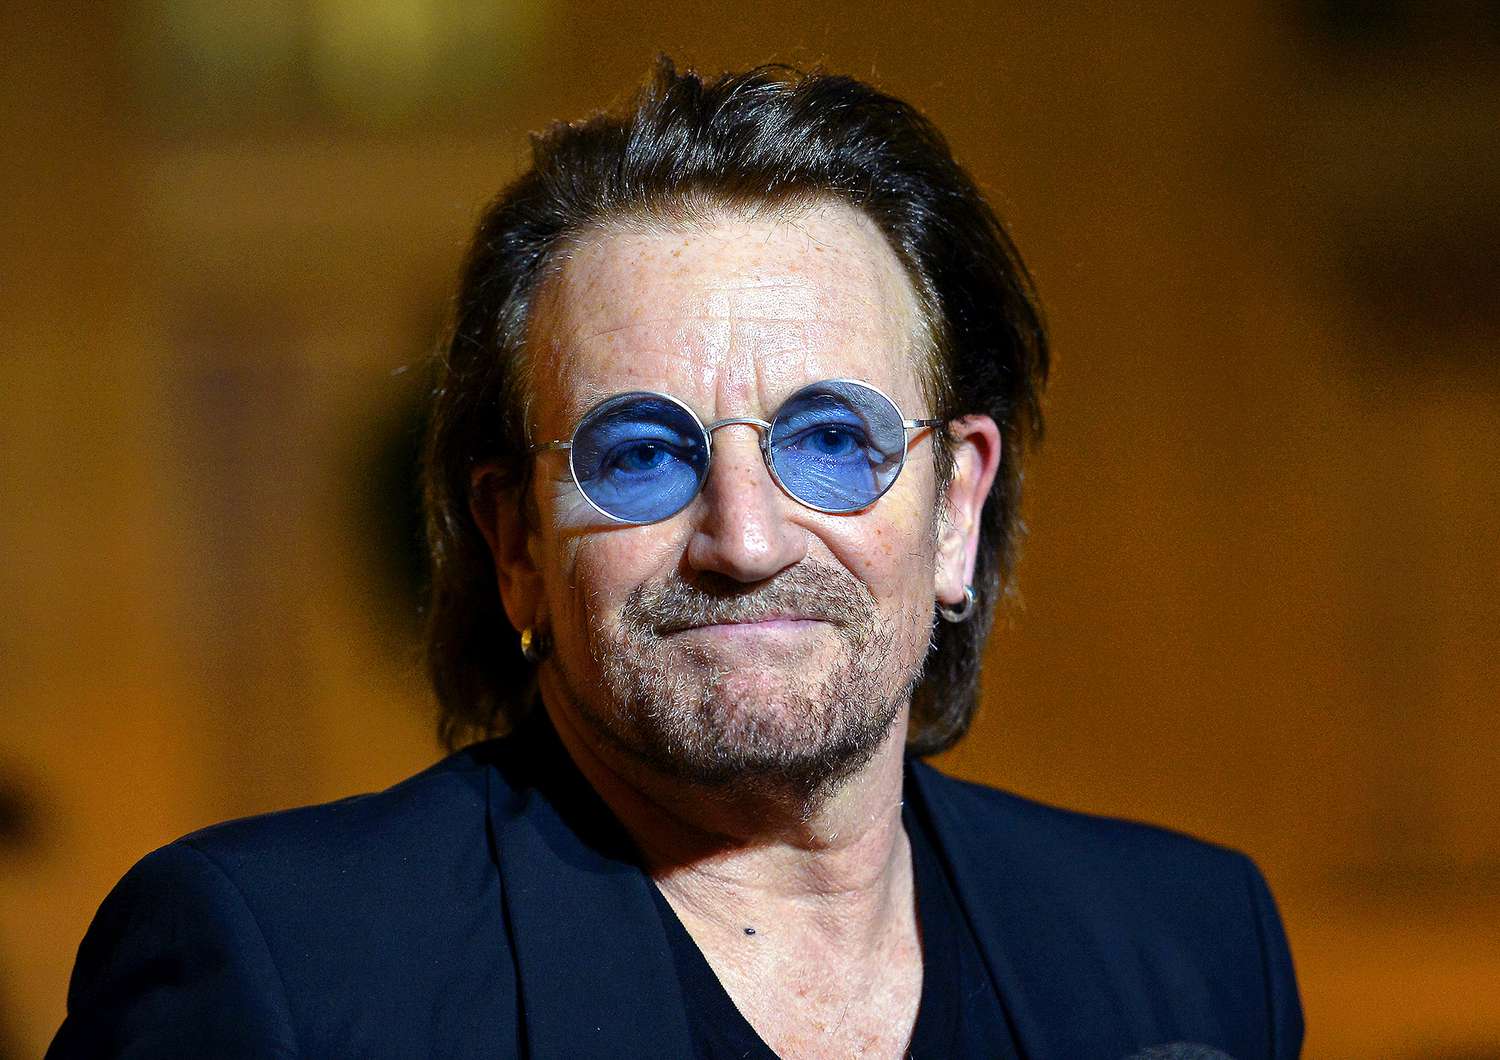 Bono wearing a black suit and eyeglasses